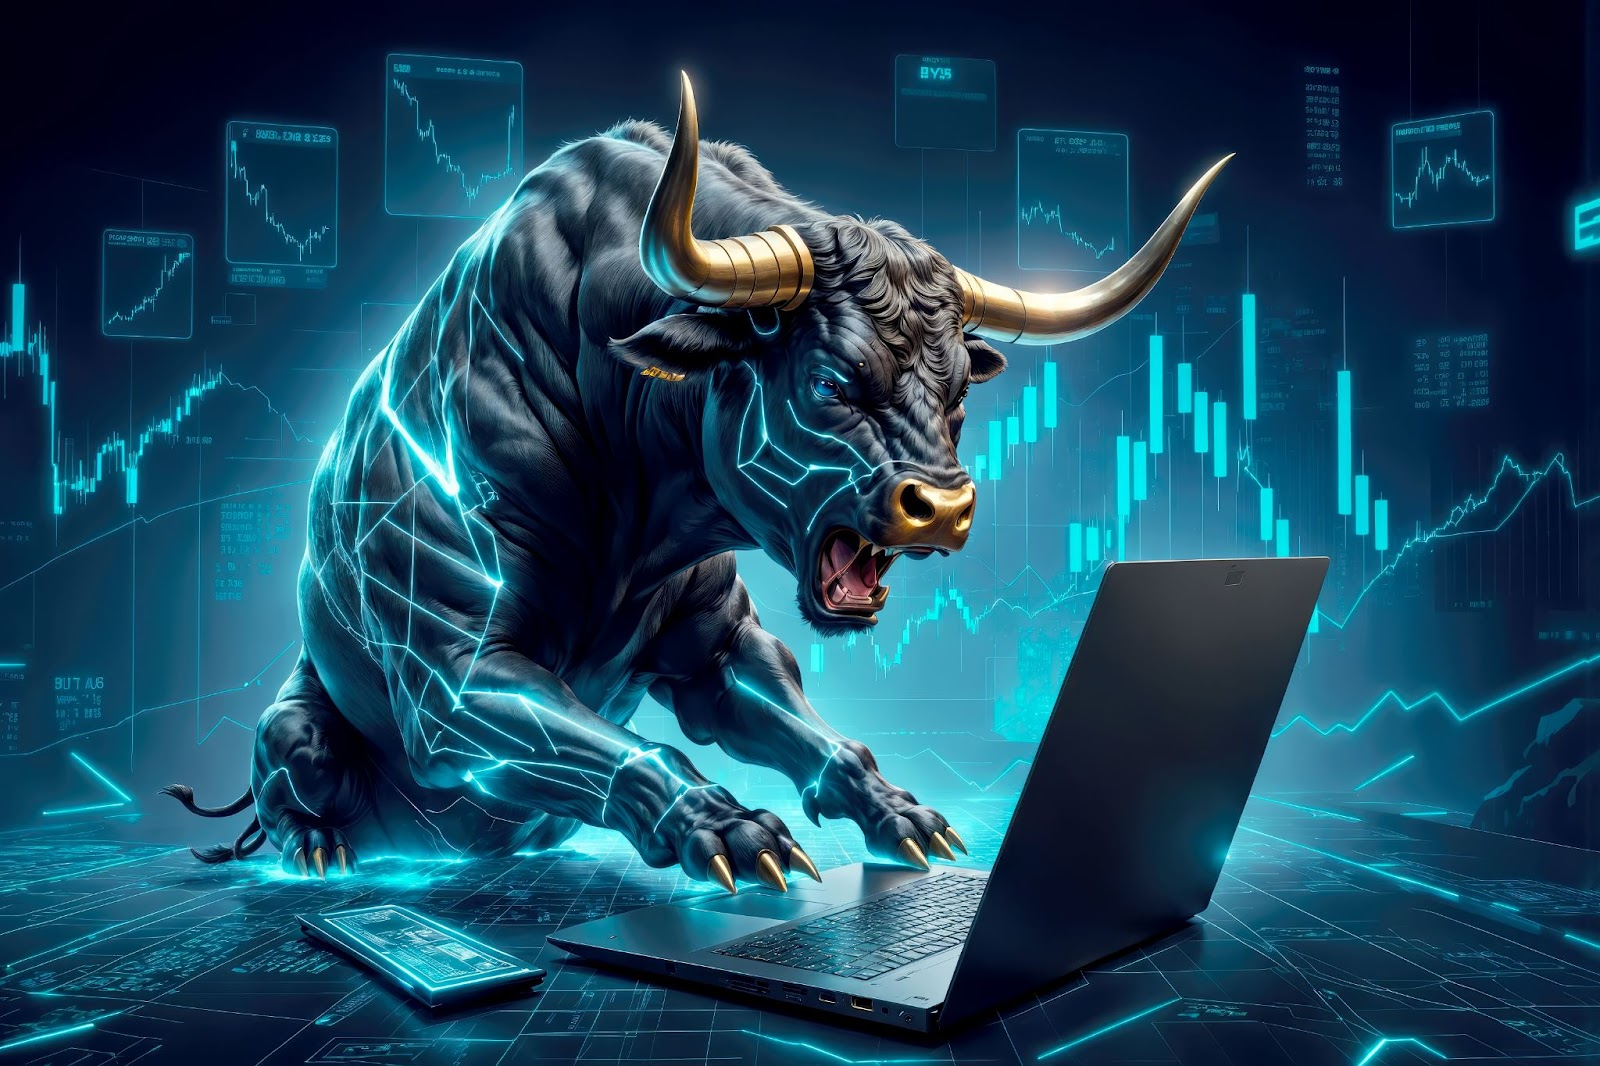 How to Turn a $100 Investment Into $10,000 This Bull Market